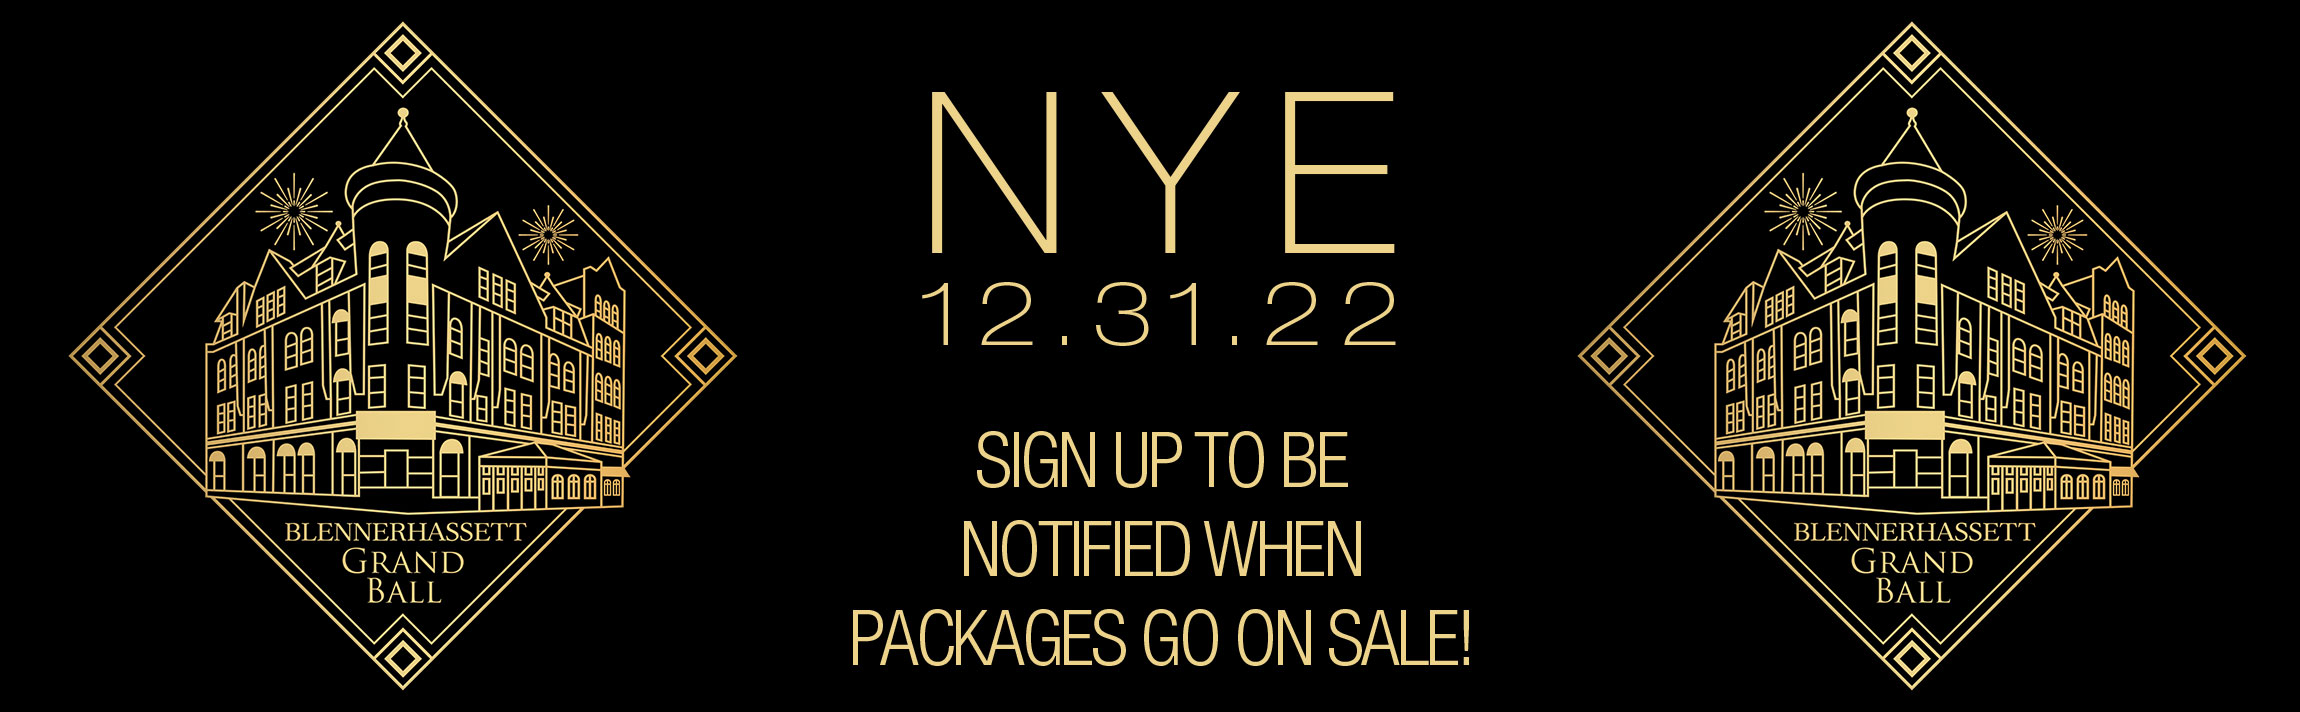 New Year's Eve Sign Up To Be Notified